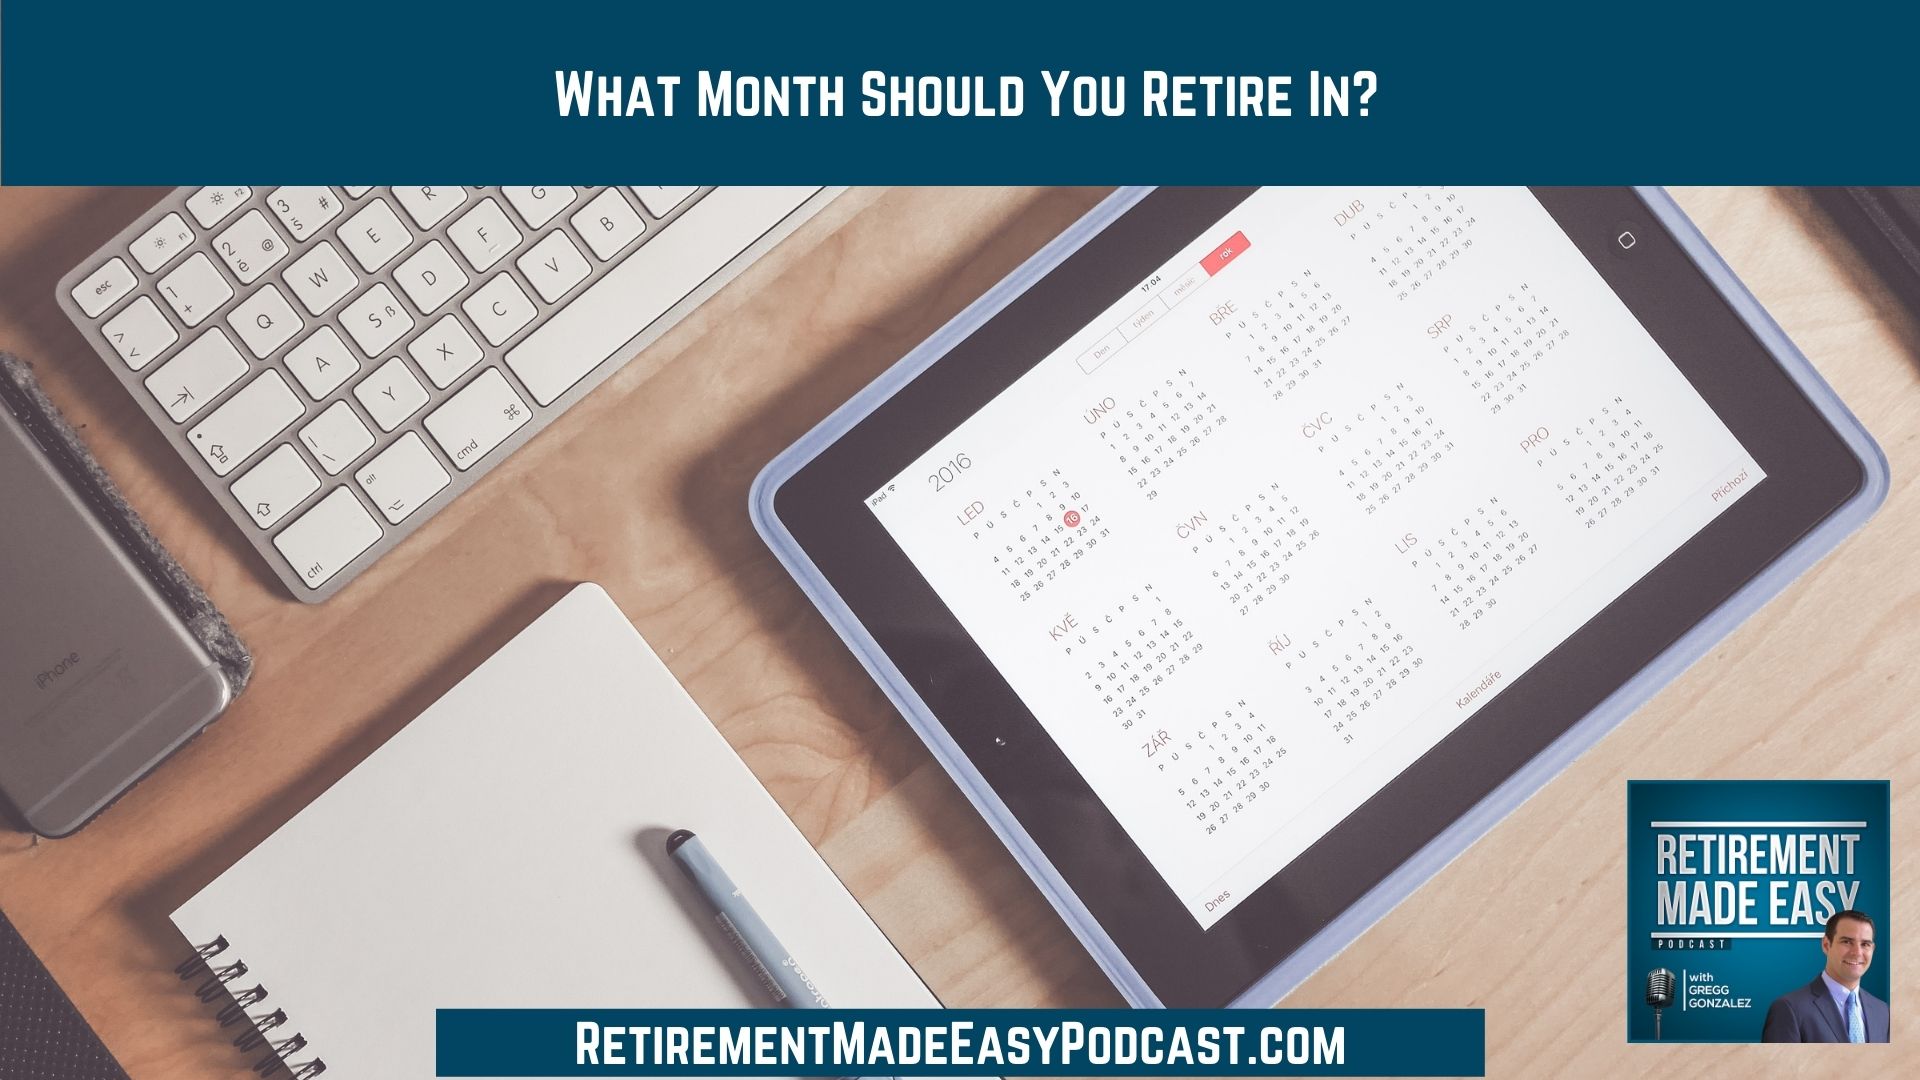 What month should you retire?